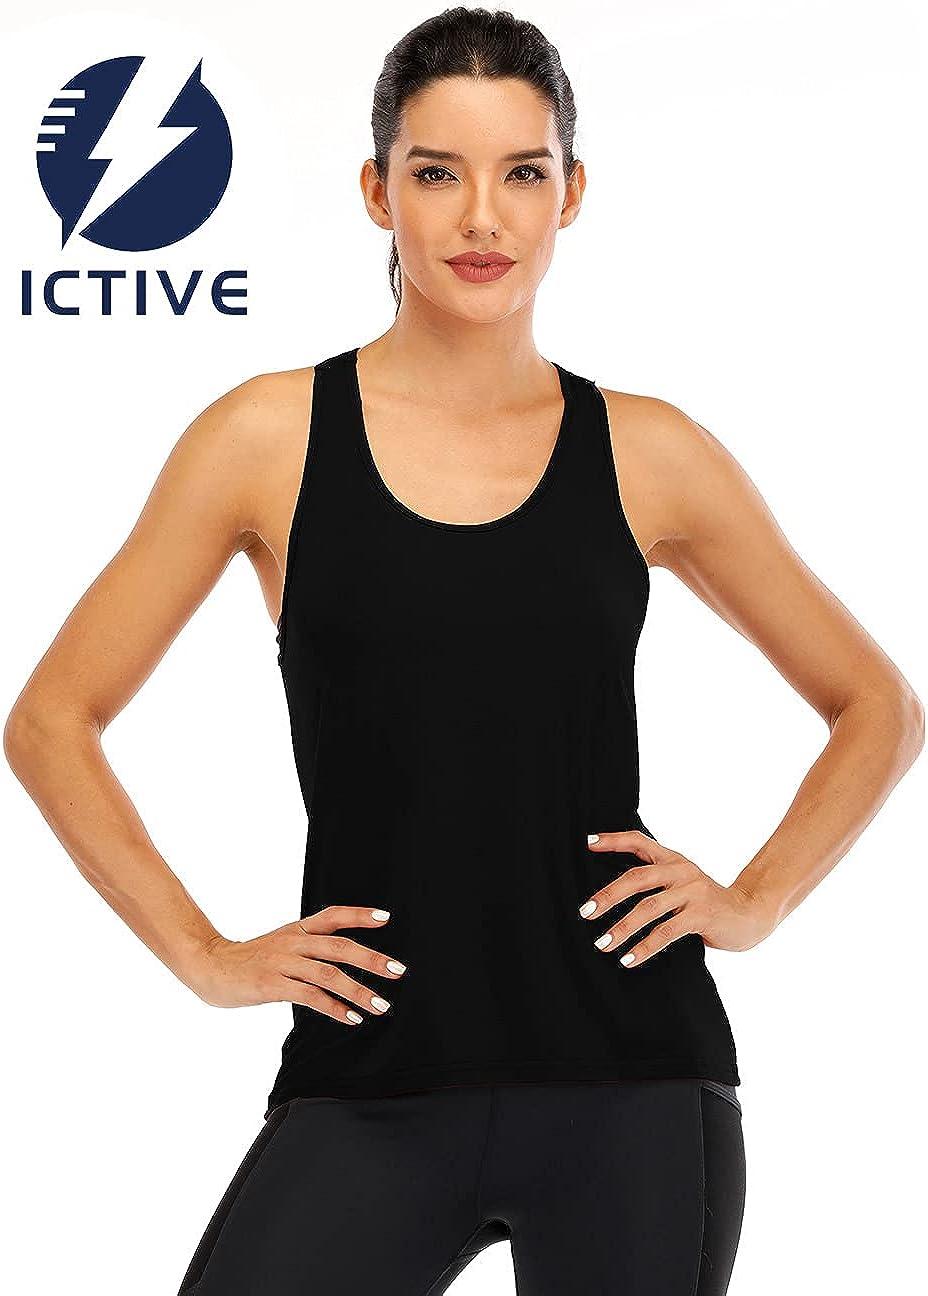  ICTIVE Workout Tank Tops for Women Breathable Mesh